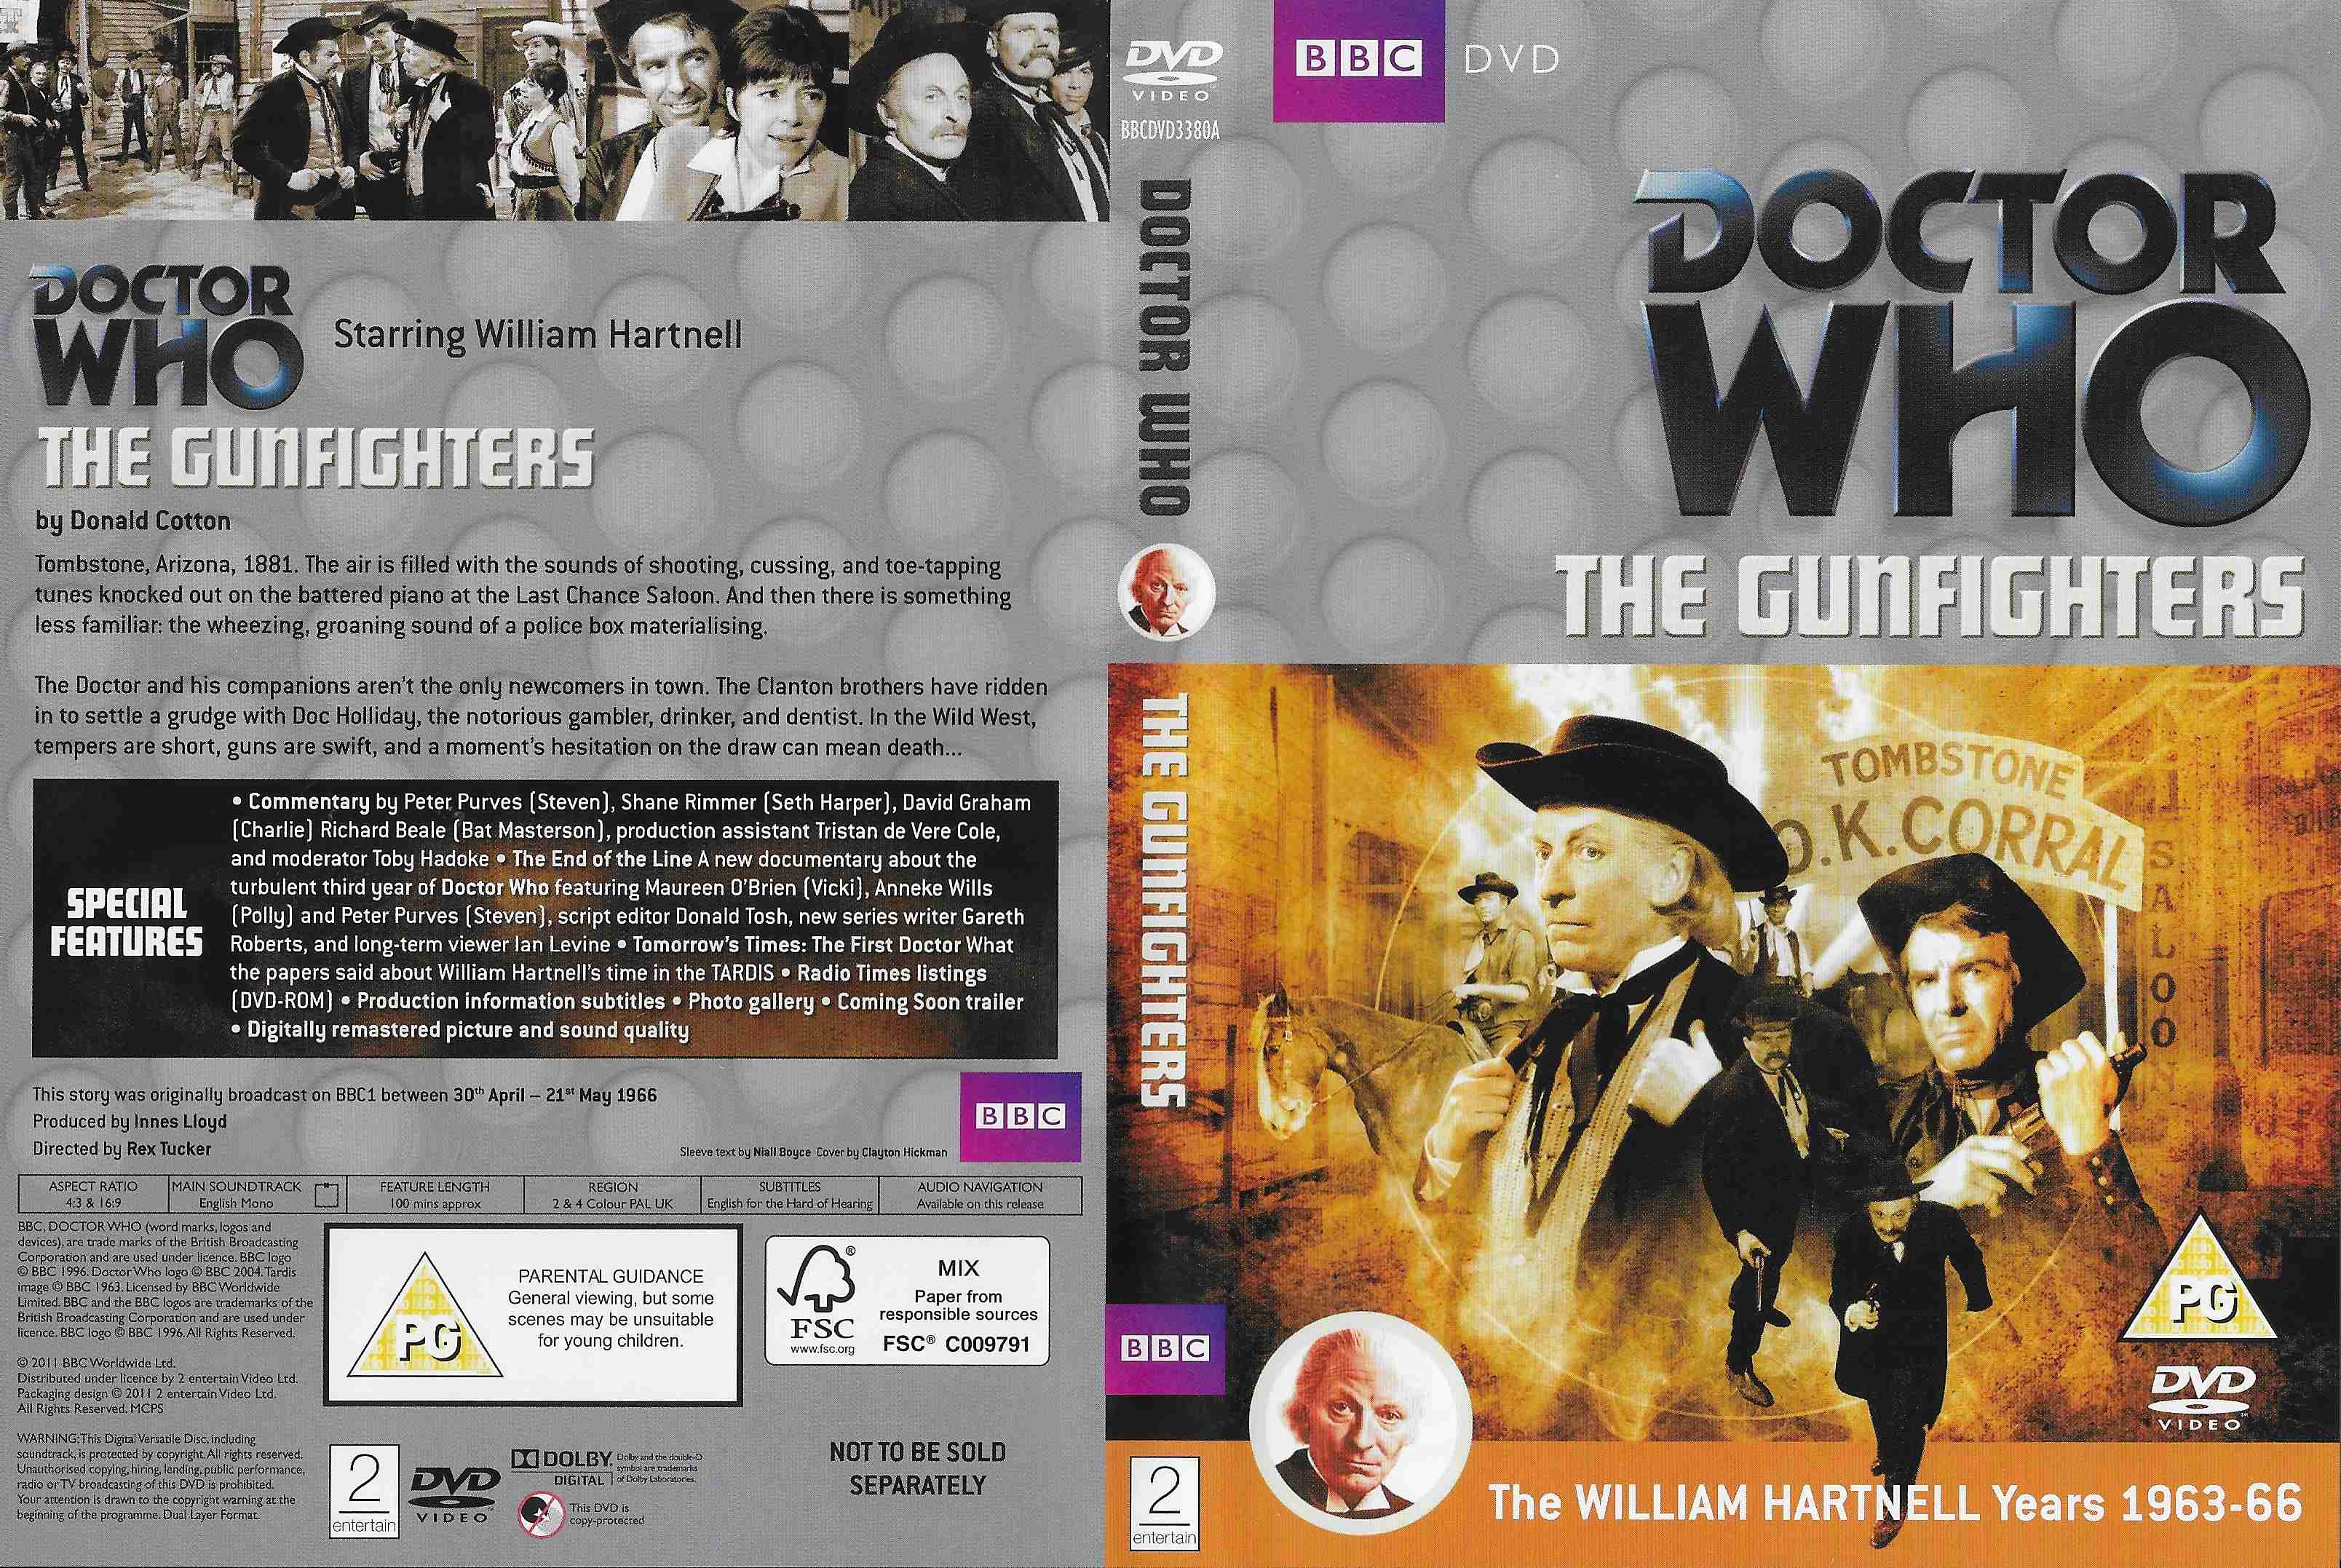 Back cover of BBCDVD 3380A